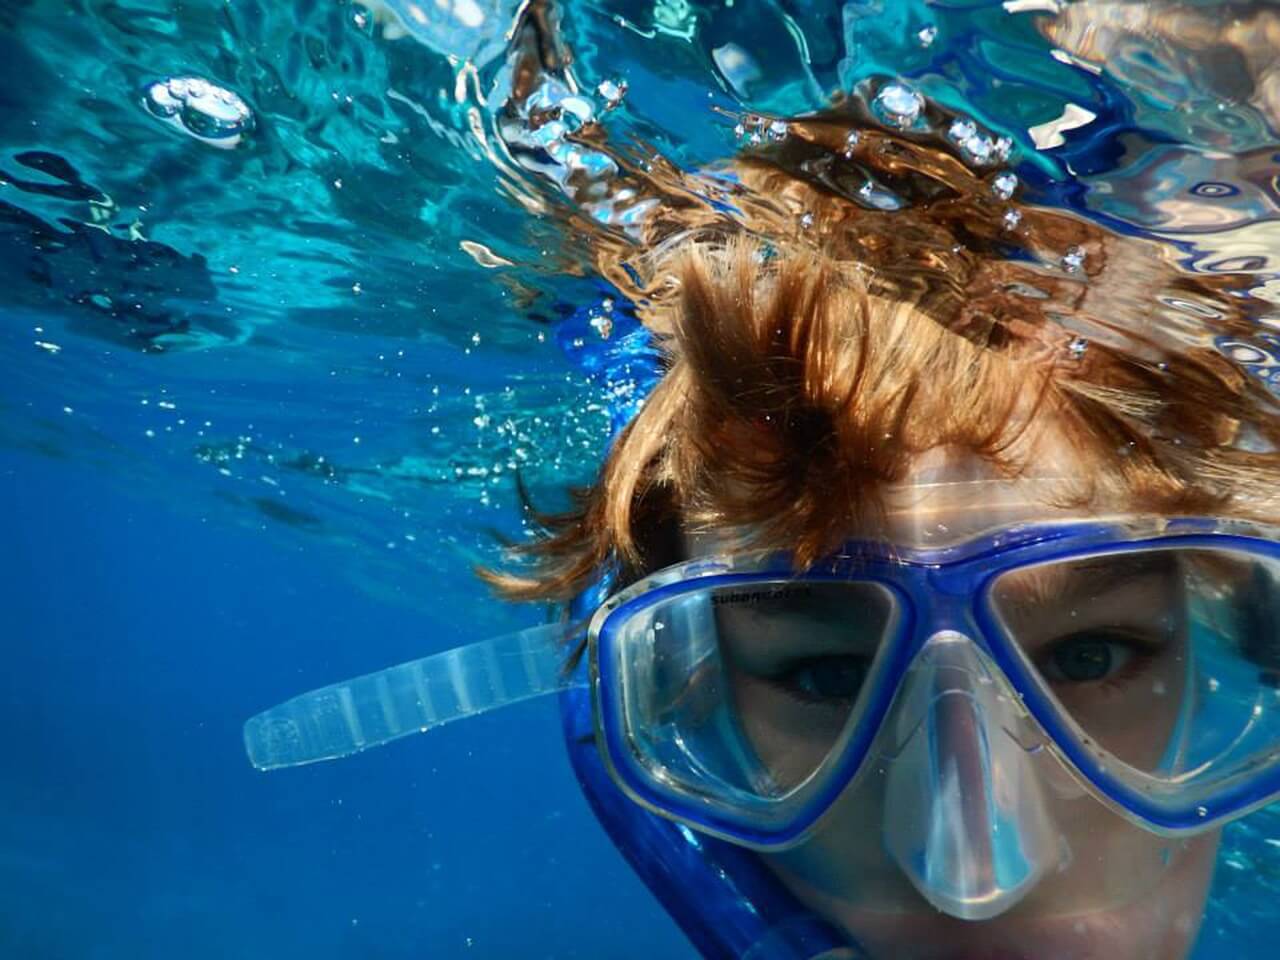 A close image of a person snorkeling